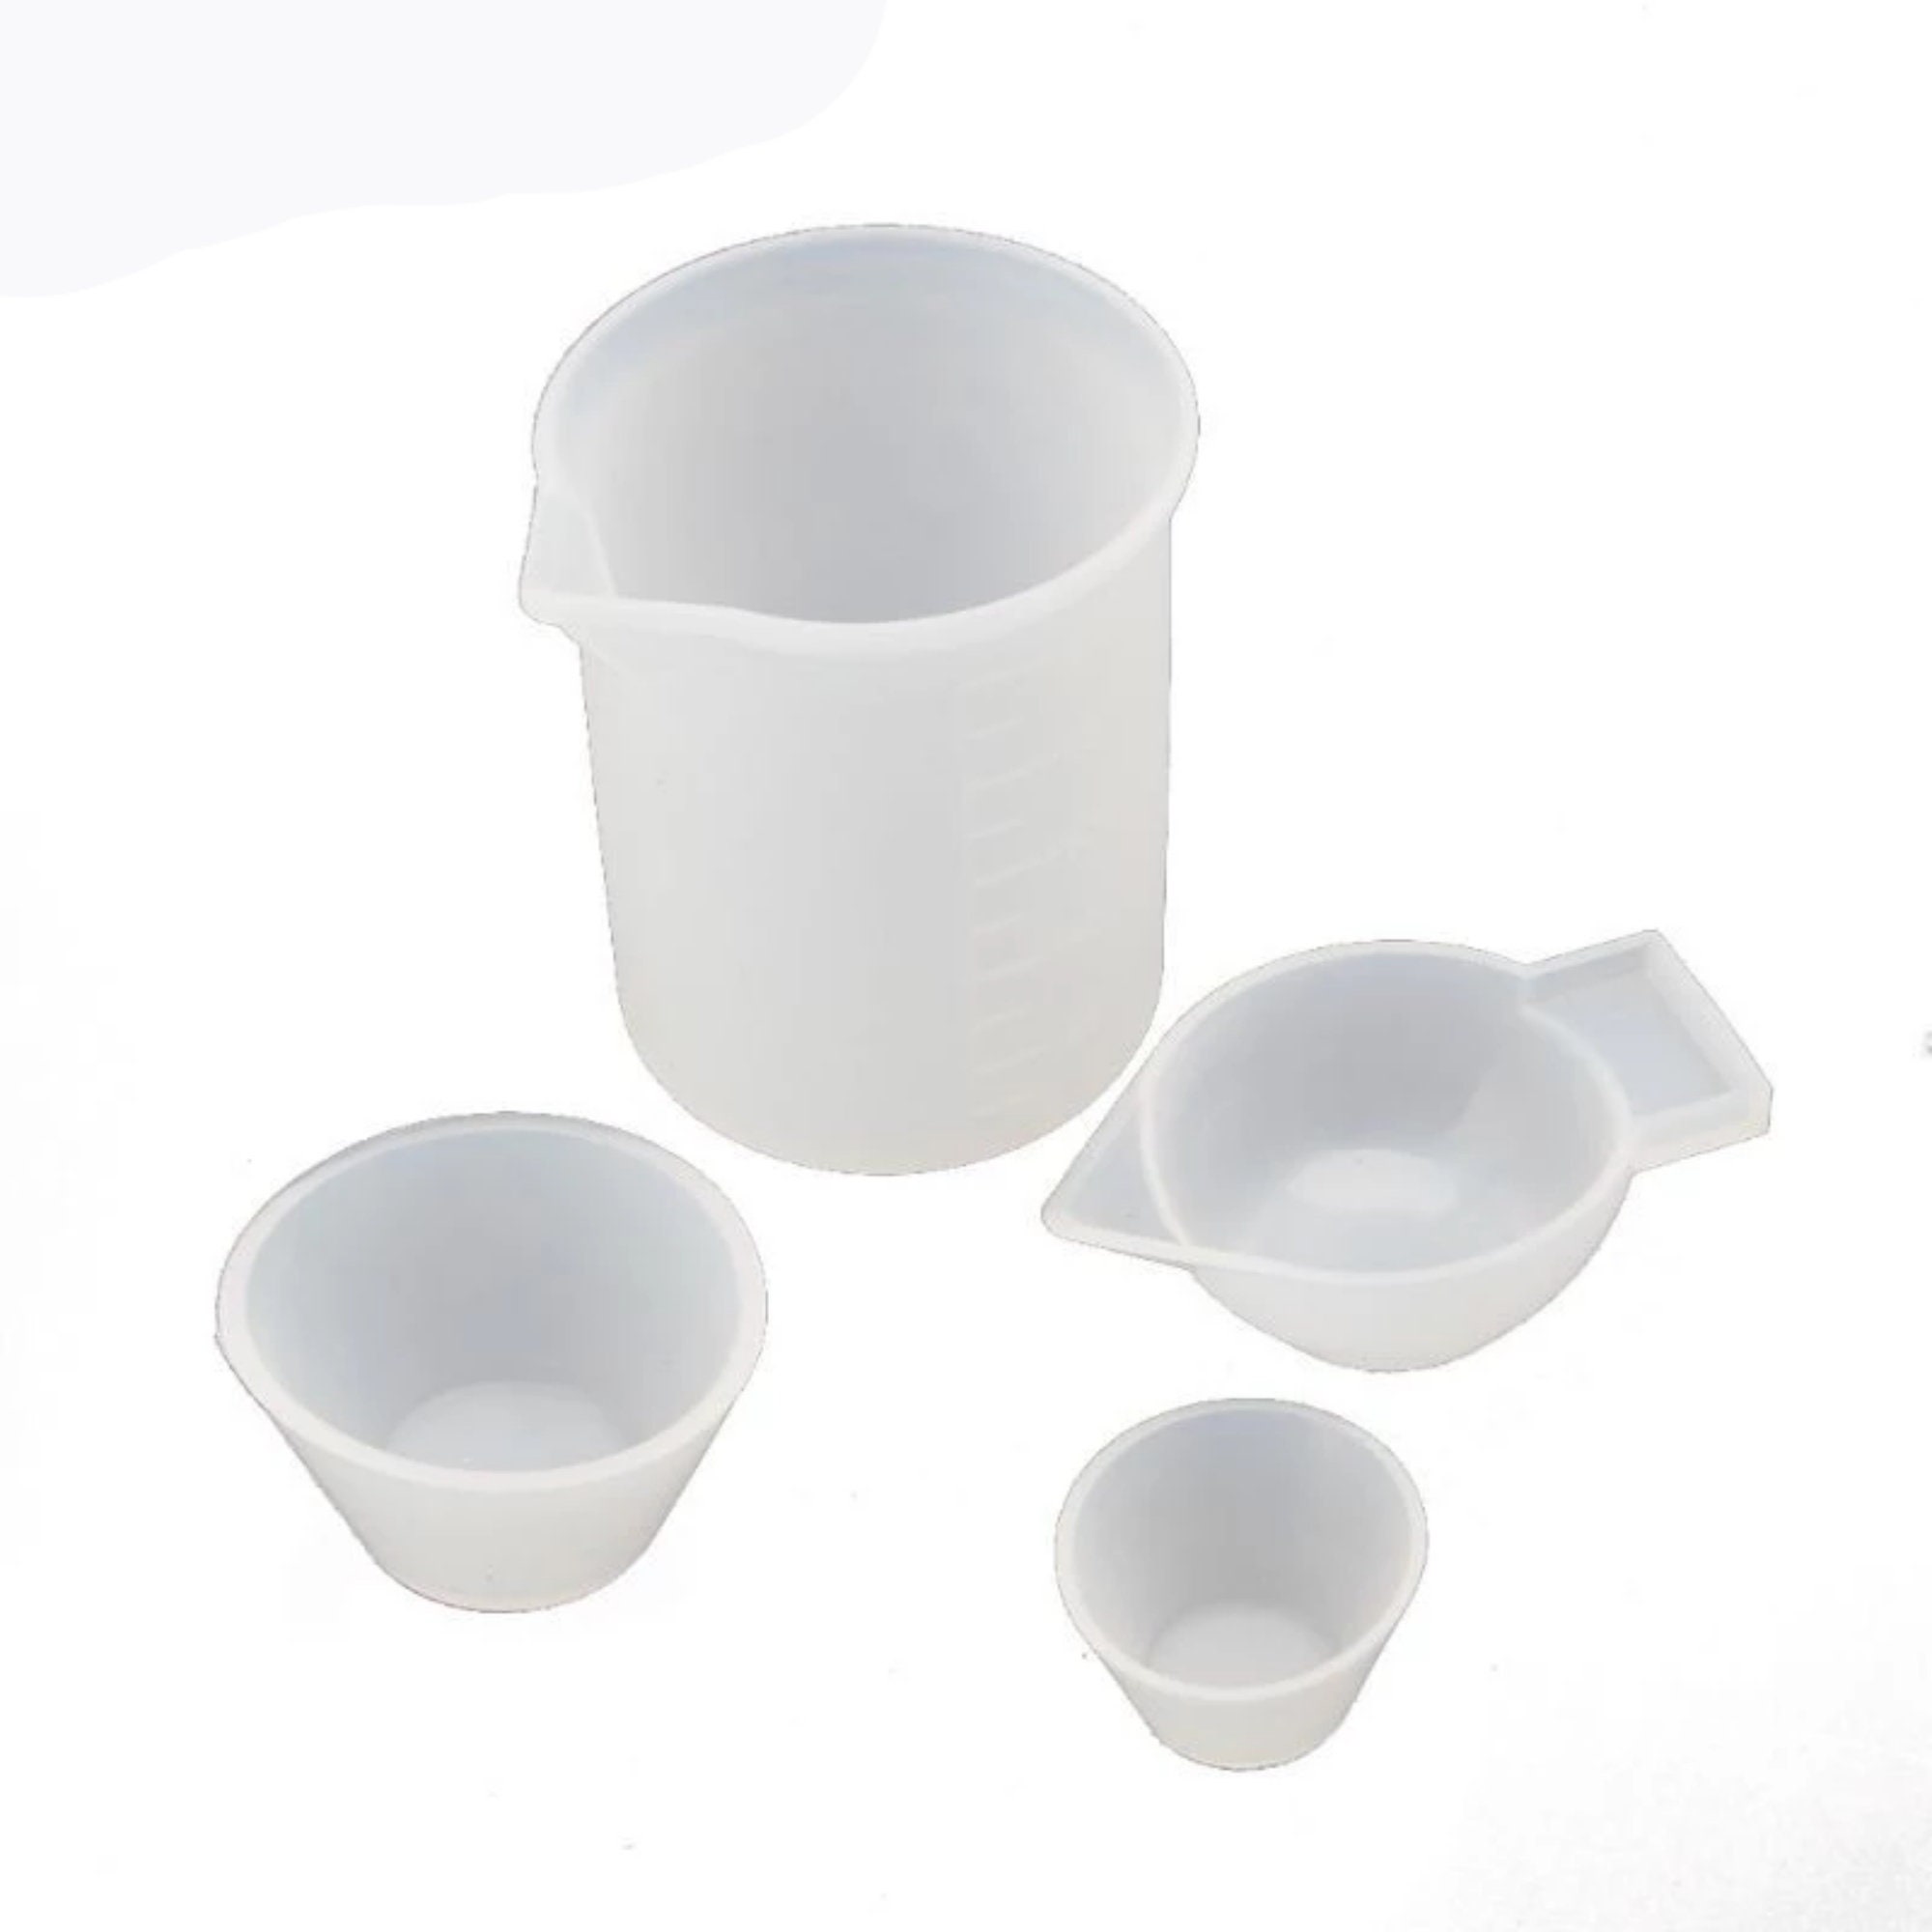 Reusable Silicone Measuring Cups for Epoxy Resin, Antislip, No-cleaning,  100ml, 300ml, 750ml, Resin Supply Tools 